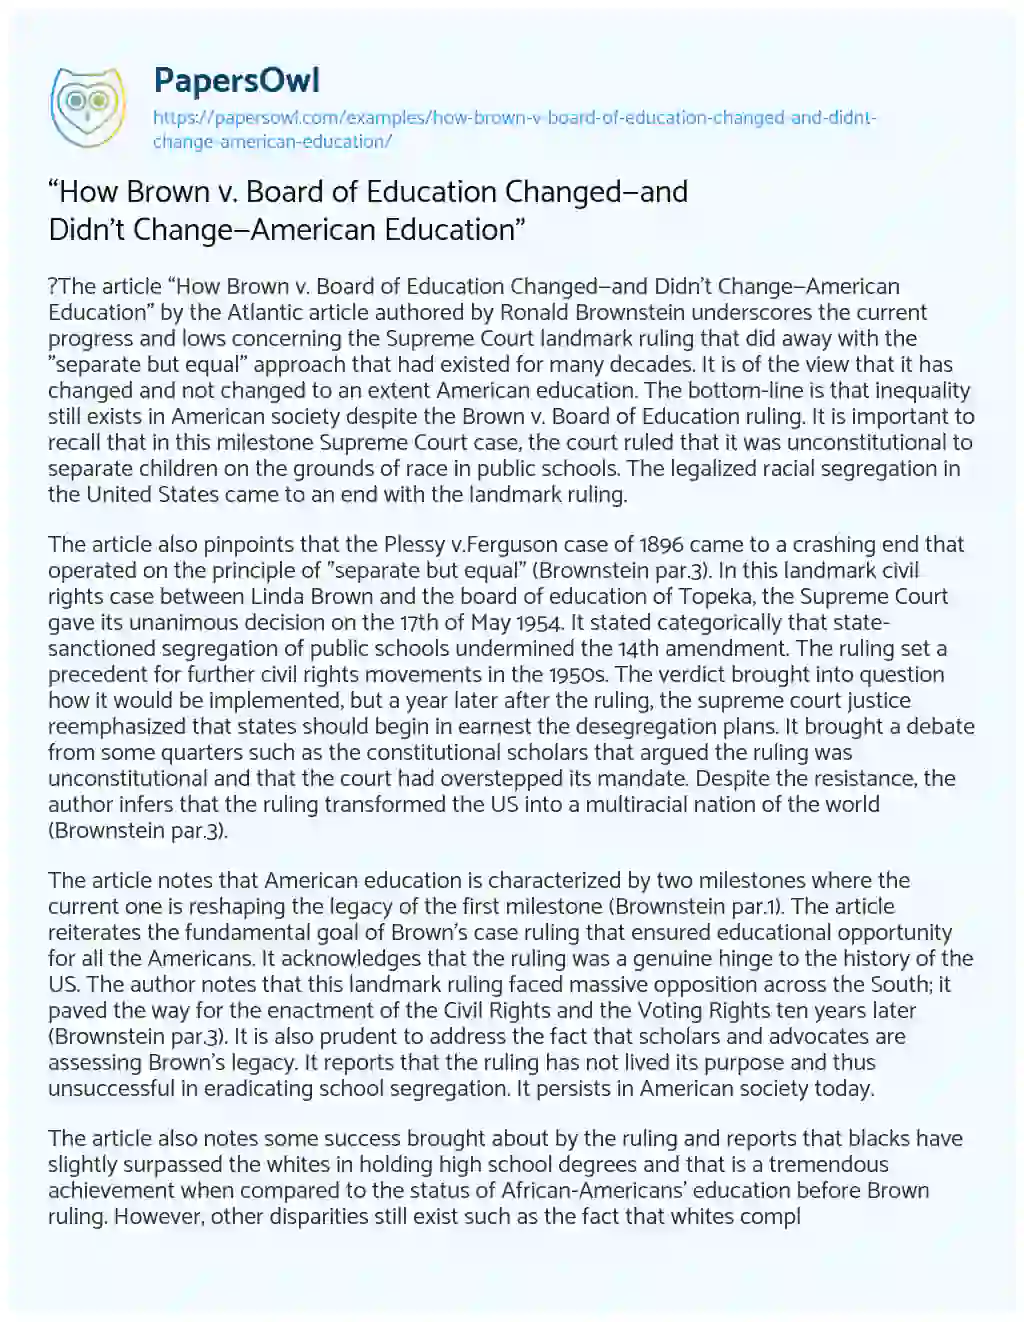 Essay on “How Brown V. Board of Education Changed—and didn’t Change—American Education”